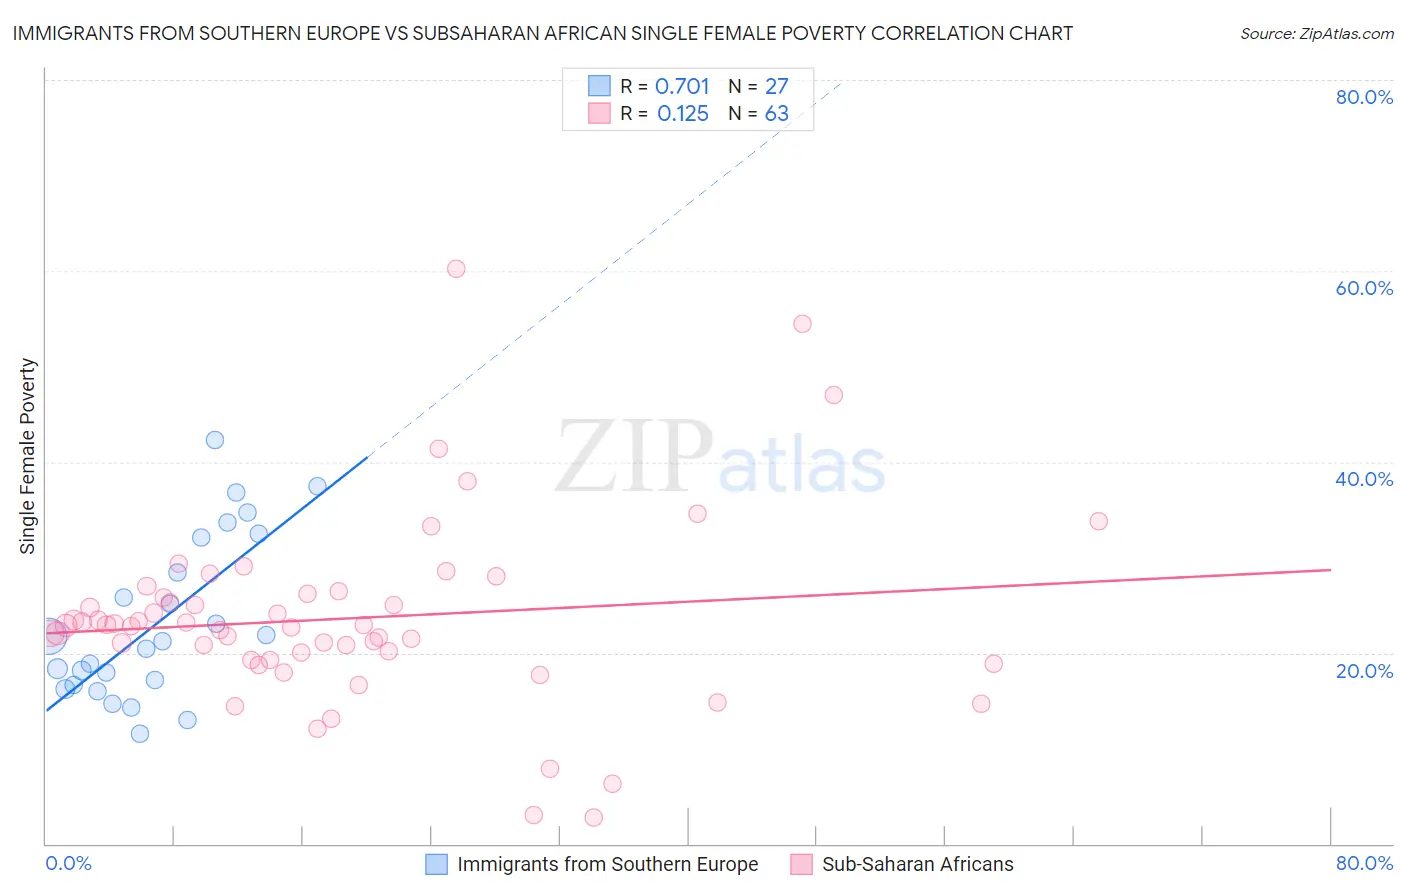 Immigrants from Southern Europe vs Subsaharan African Single Female Poverty